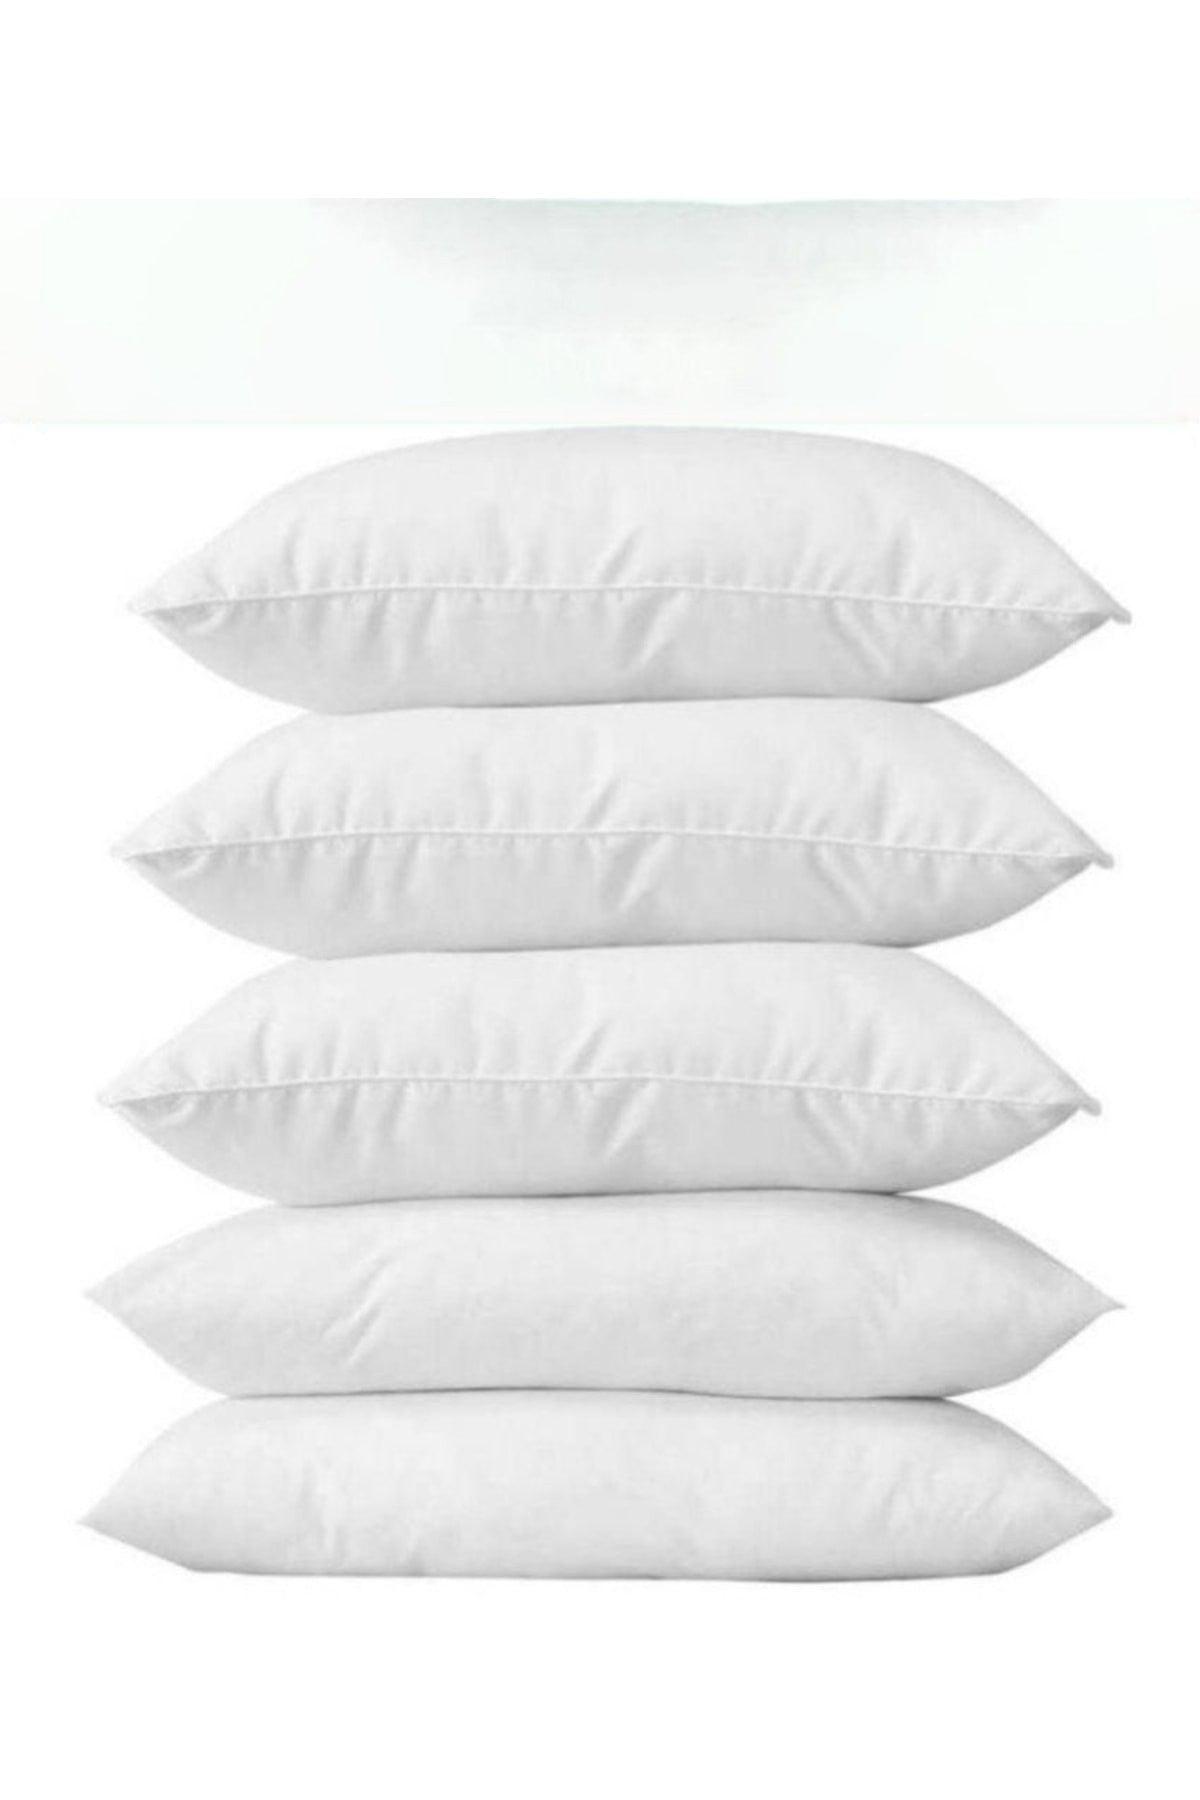 Silicone Filled Pillow - Puffy Soft Pillow - 5 Pillows - Swordslife